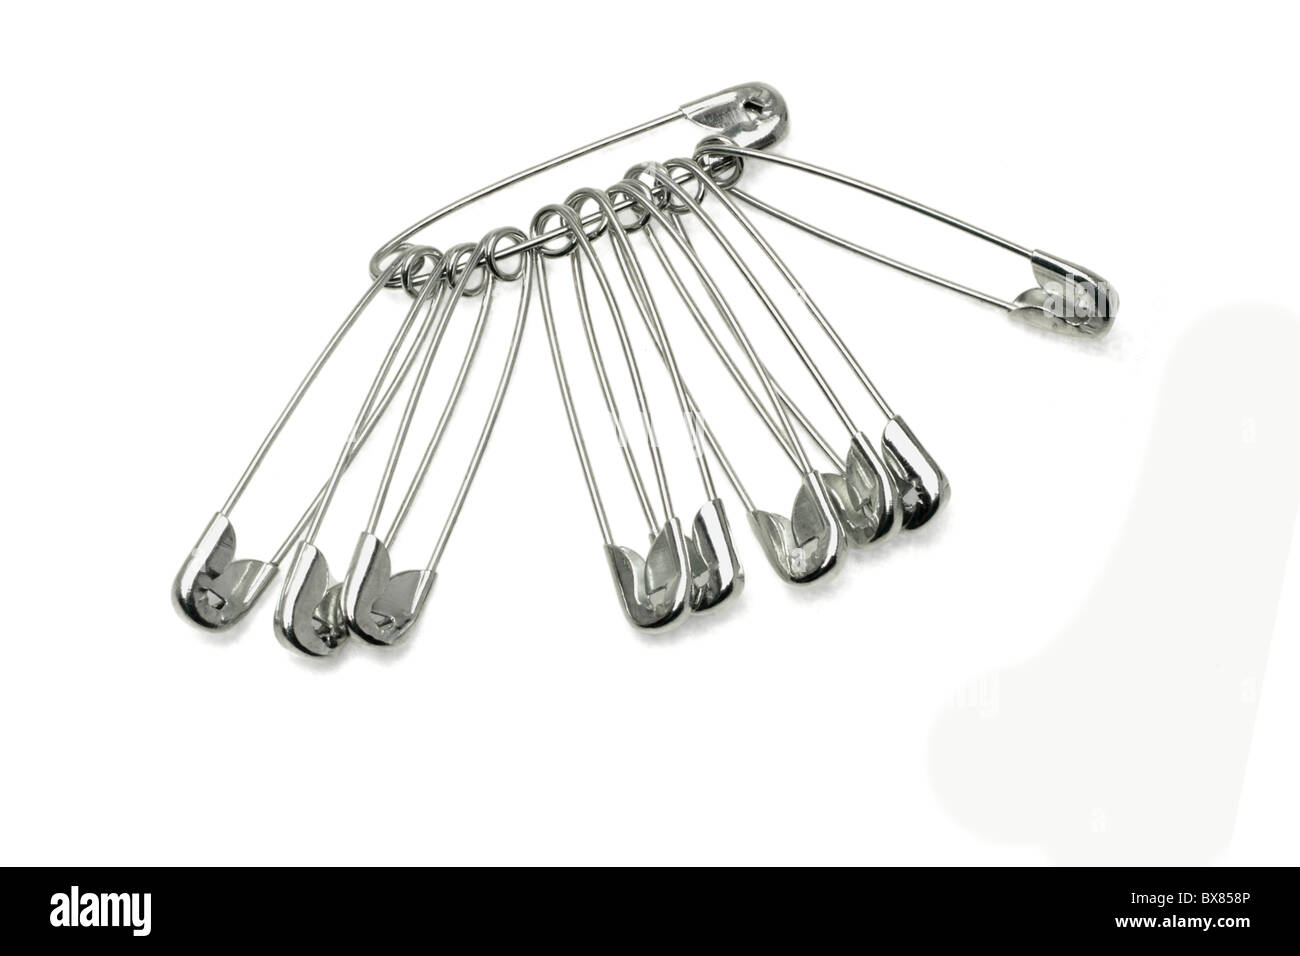 Safety pins locked together on white background Stock Photo